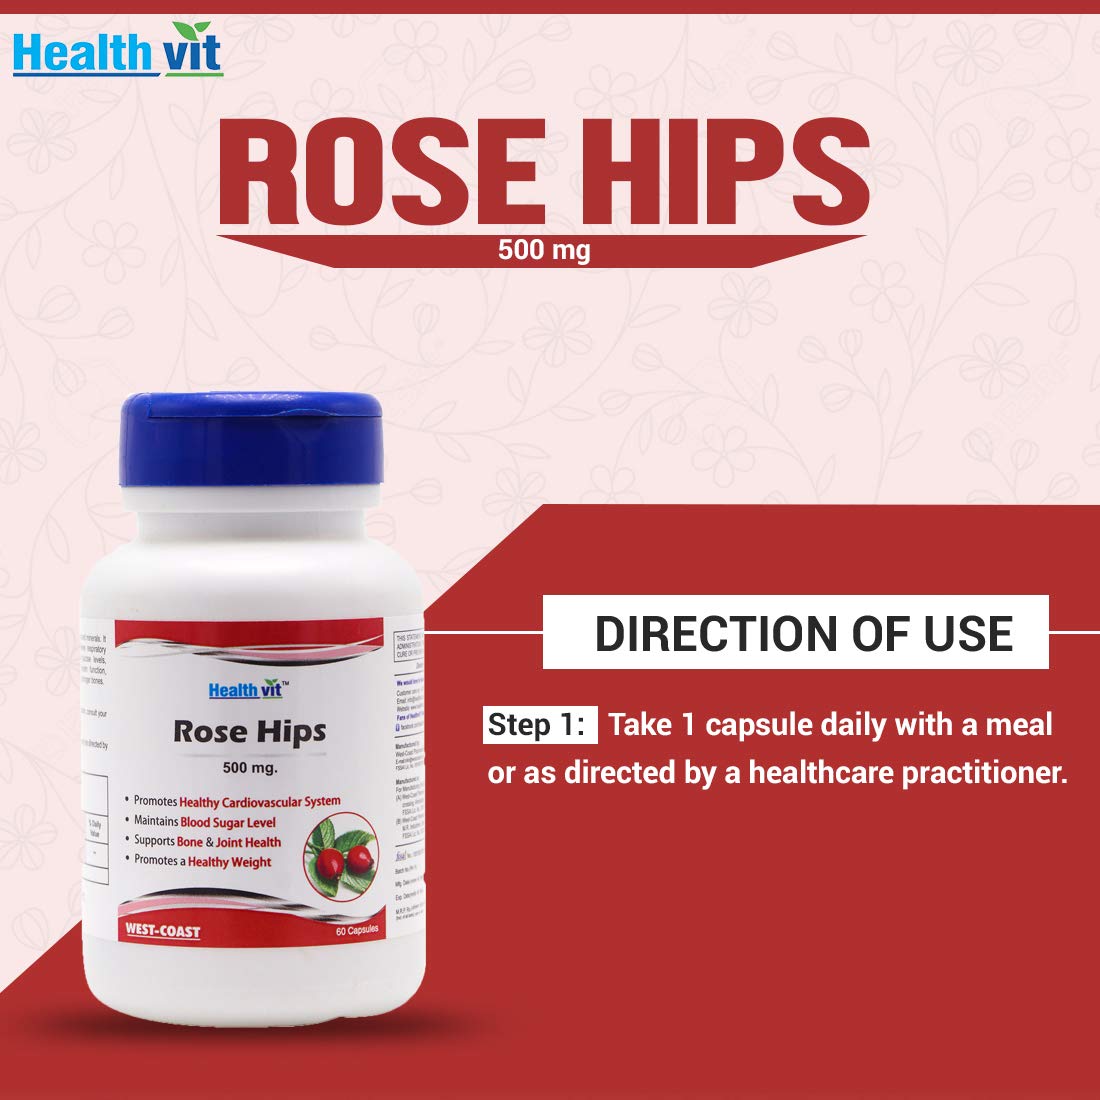 Healthvit Rose Hips 500mg For Healthy Bone And Joint | Promotes A Healthy Weight | Maintains Blood Sugar Level | Promotes Healthy Cardiovascular System | 100% Natural And Vegan | 60 Capsules